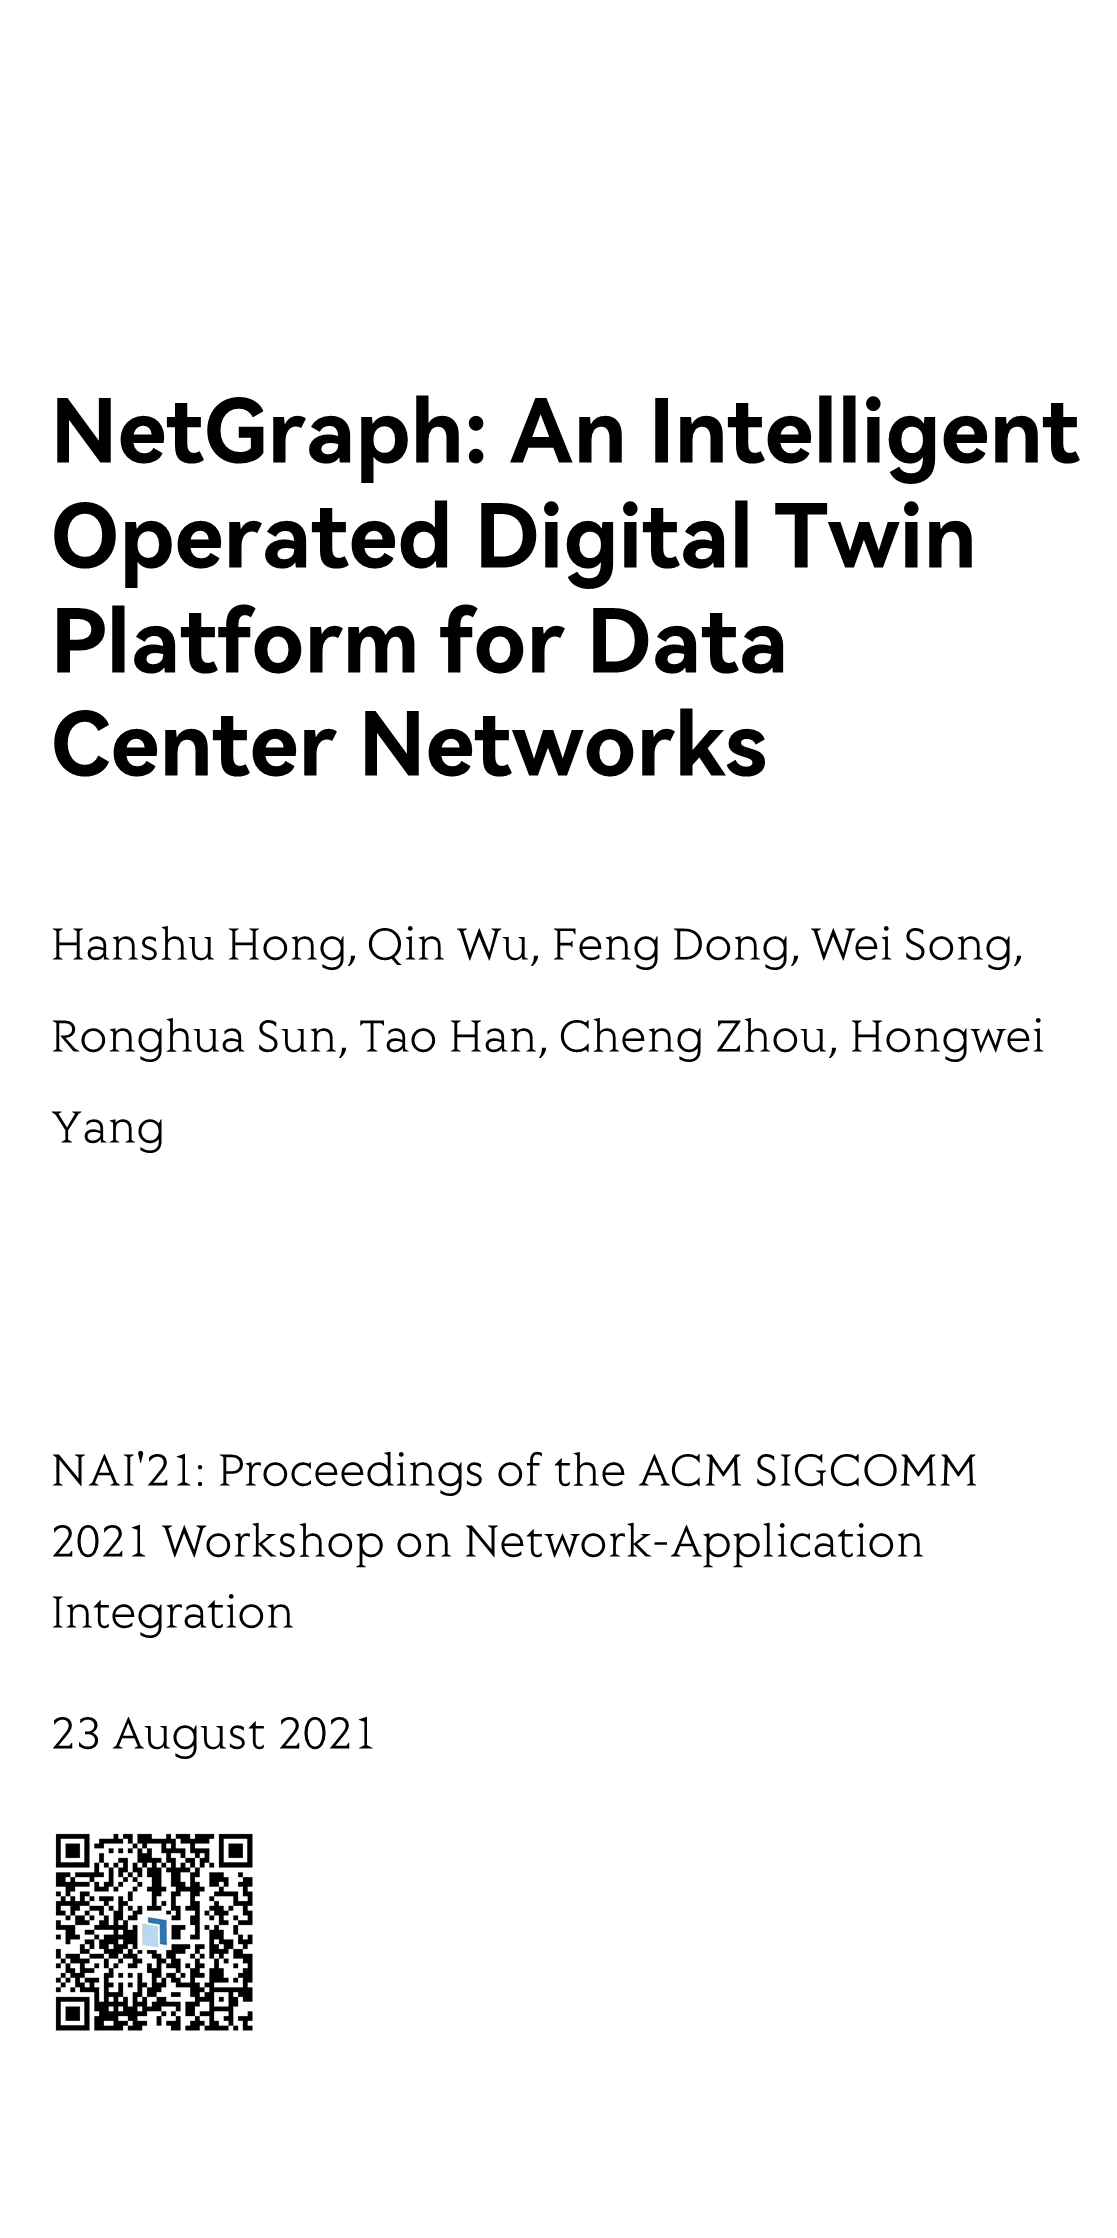 NAI'21: Proceedings of the ACM SIGCOMM 2021 Workshop on Network-Application Integration_1